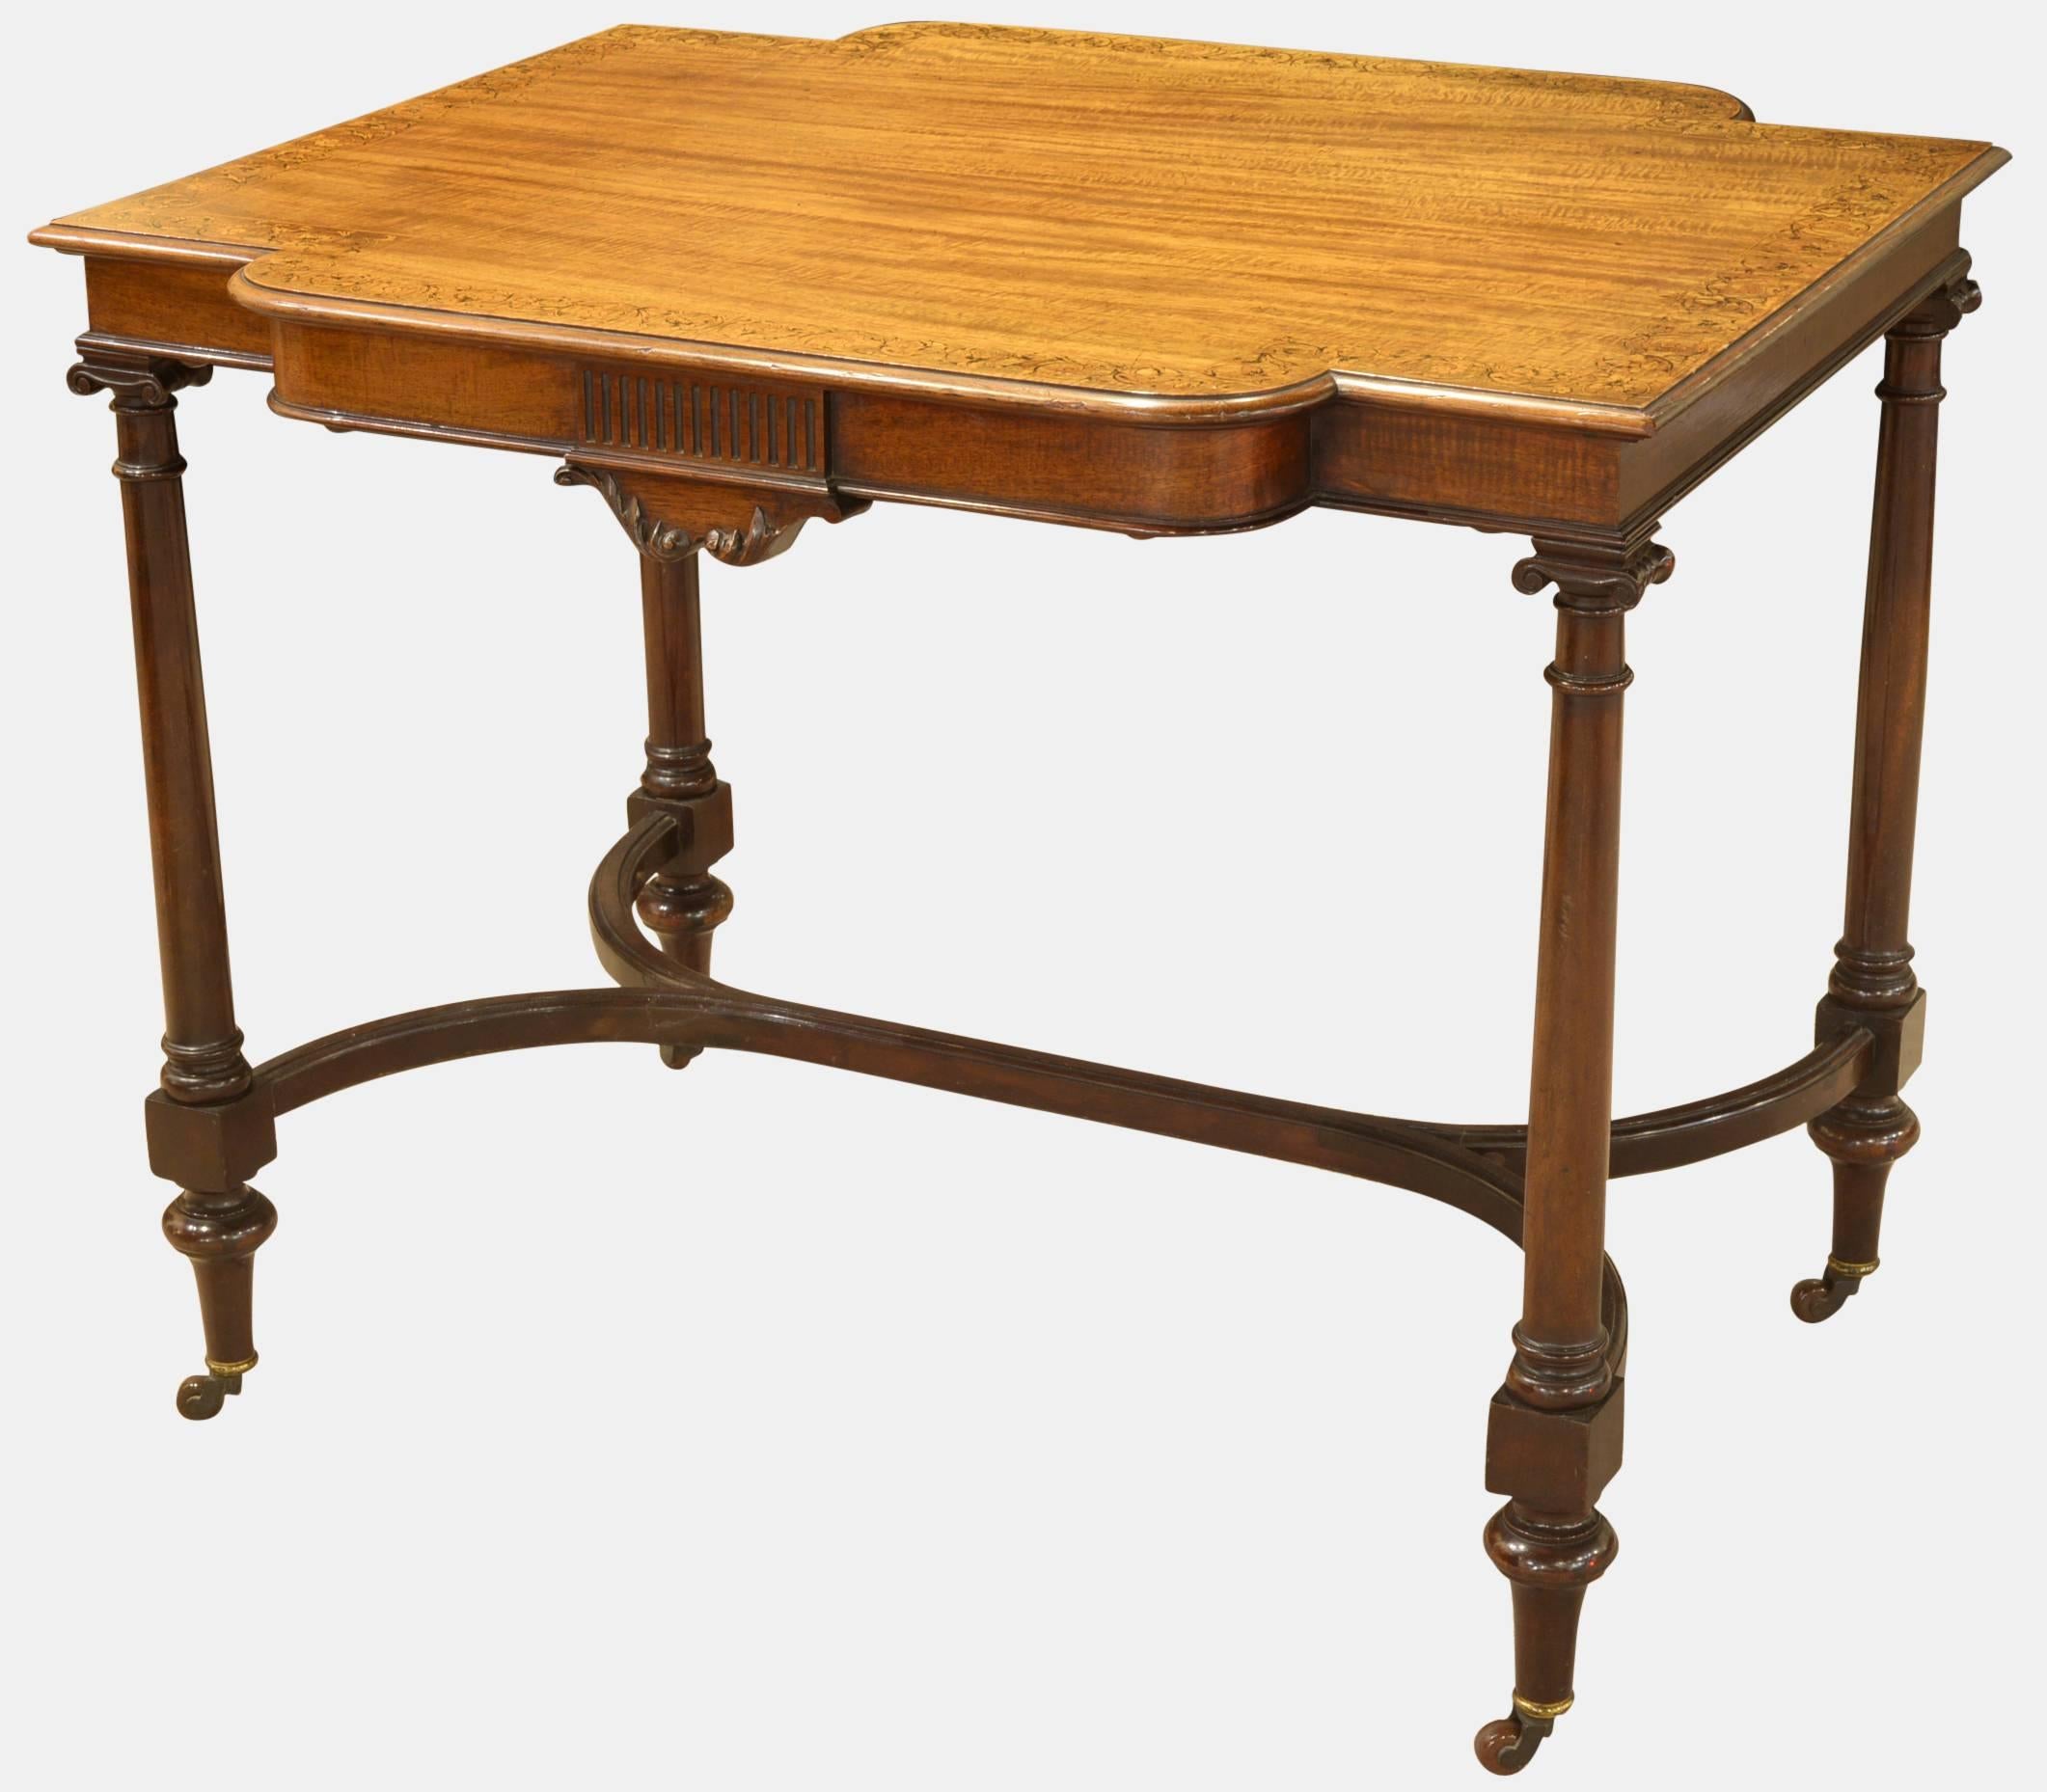 An early Victorian mahogany centre table with satin inlay decoration to the edge and 'Y' stretcher underneath.